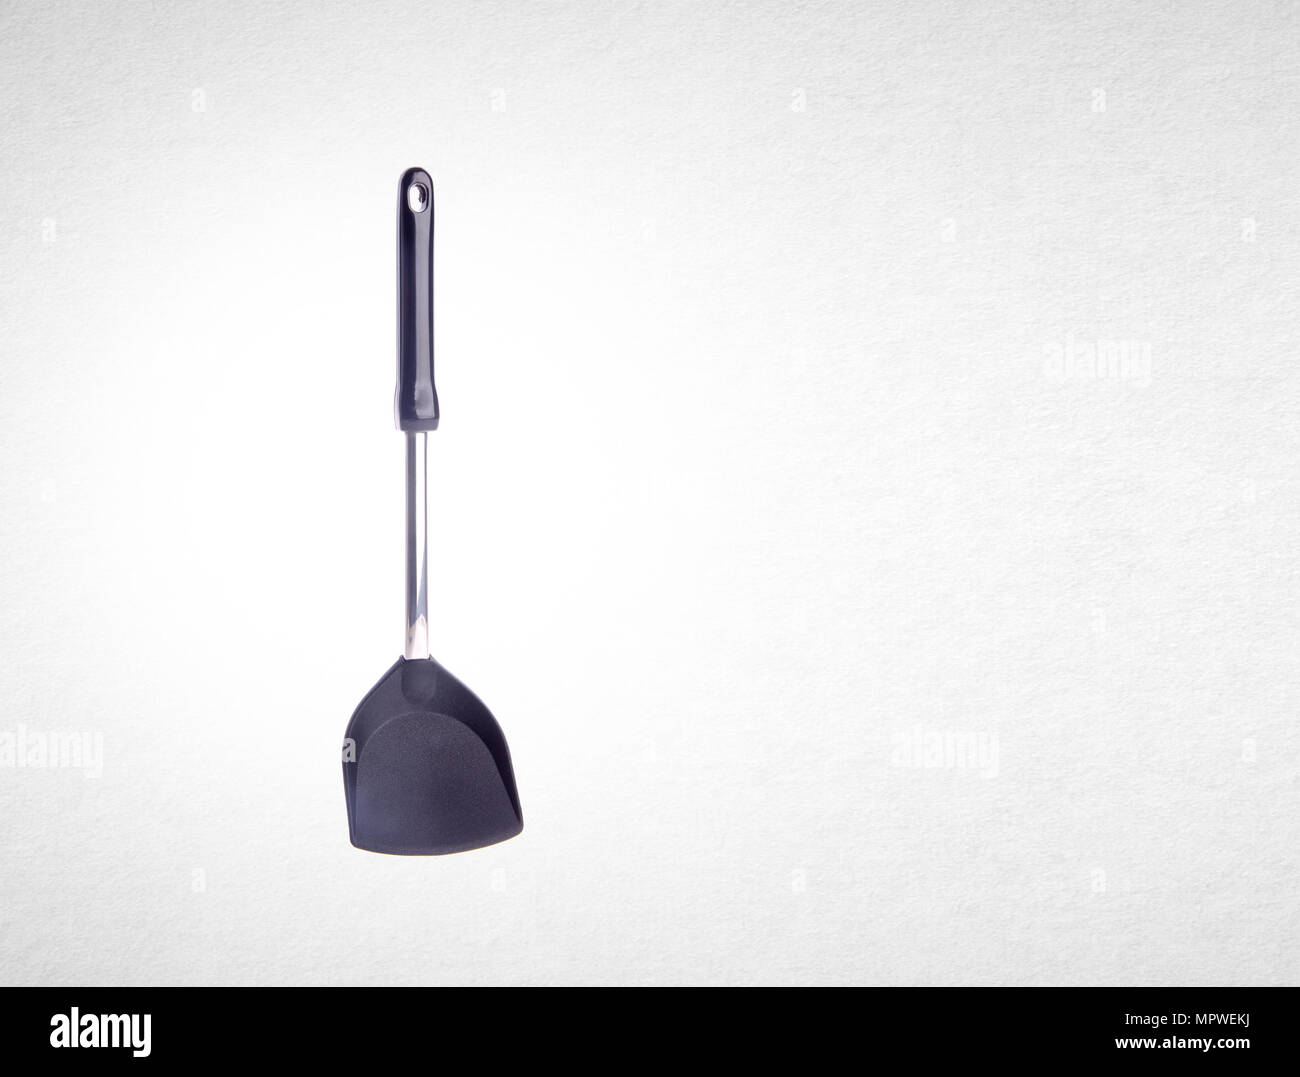 kitchen utensils or spade of frying pan on background Stock Photo ...